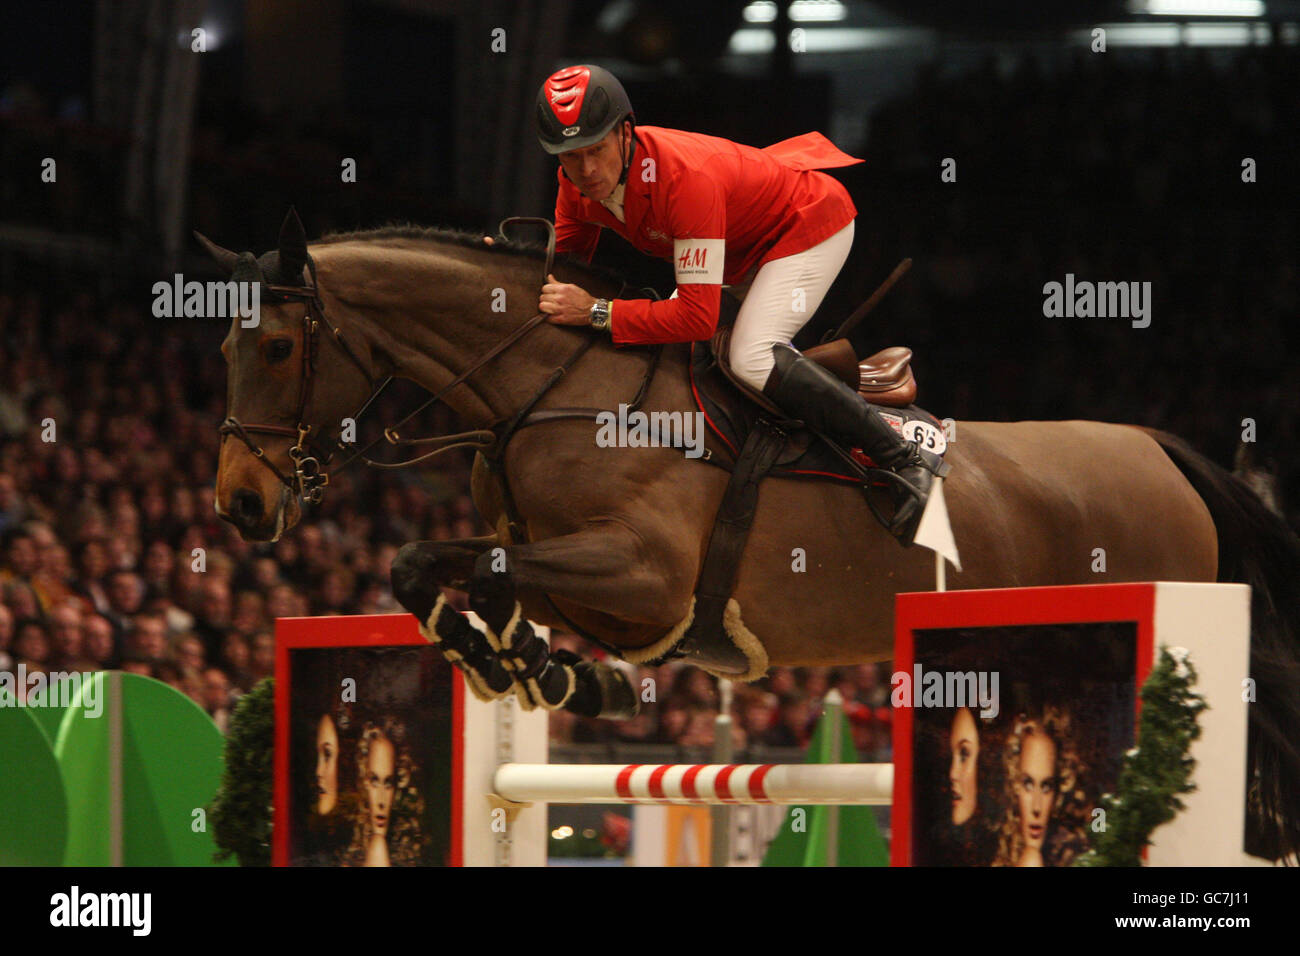 Switzerland's Pius Schwizer riding Carlina competes in the Rolex FEI Worldcup Jumping during the London International Horse Show at the Olympia Exhibition Centre, London. Stock Photo